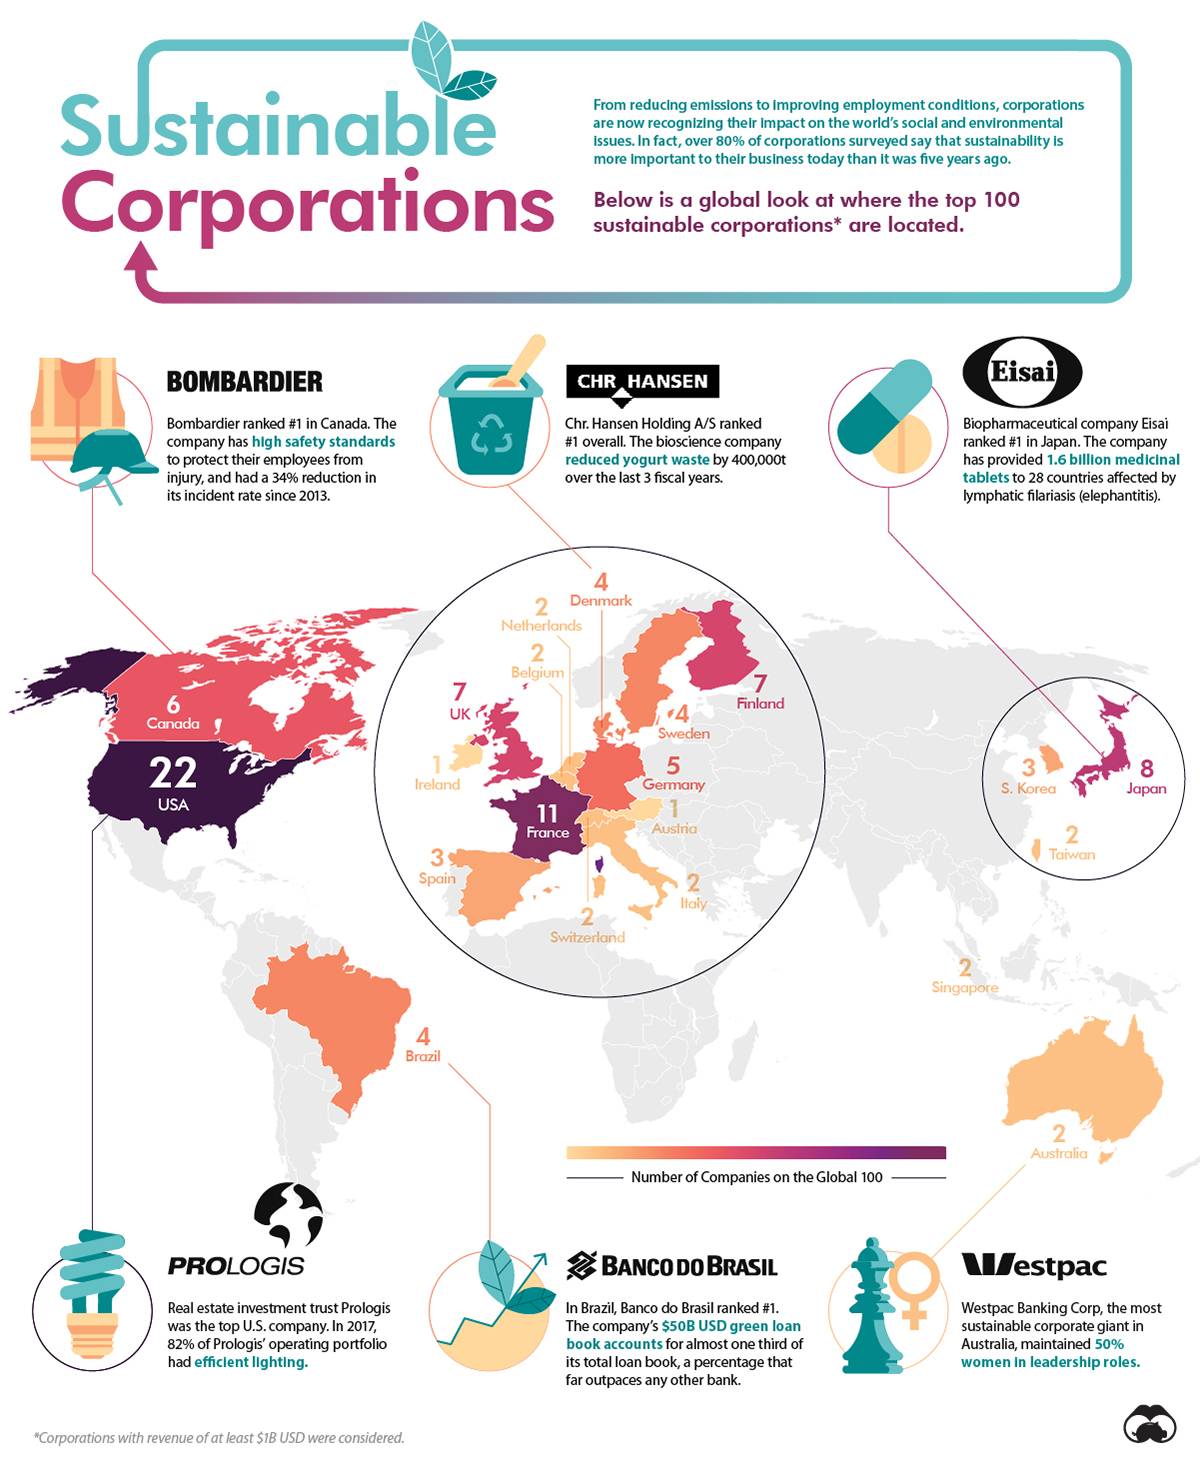 Mapped: The Countries With the Most Sustainable Corporations